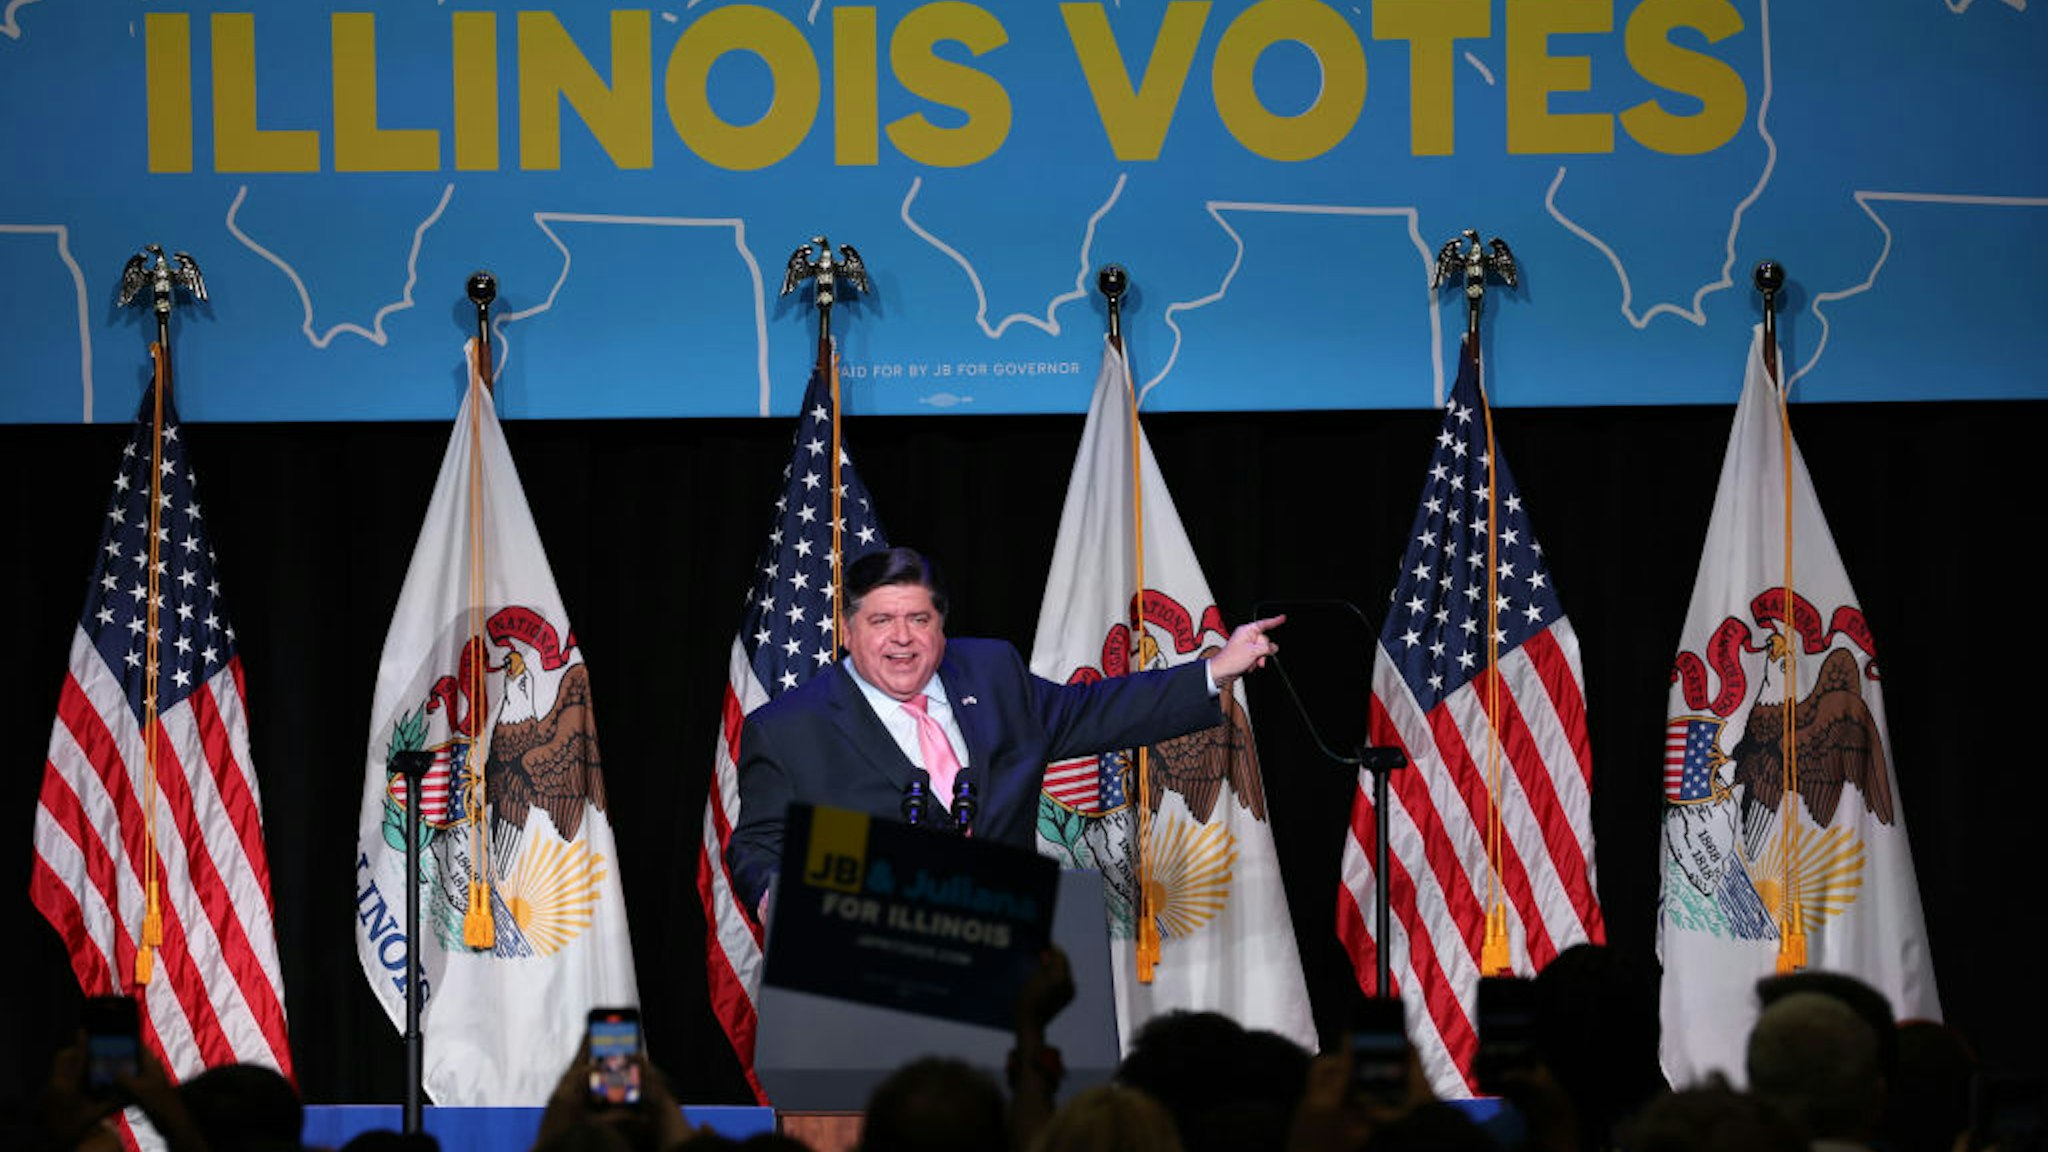 CHICAGO, ILLINOIS - SEPTEMBER 16: Illinois Governor J.B. Pritzker participates in a rally to support Illinois Democrats on the campus of UIC on September 16, 2022 in Chicago, Illinois. Vice President Kamala Harris also participated attended the rally.